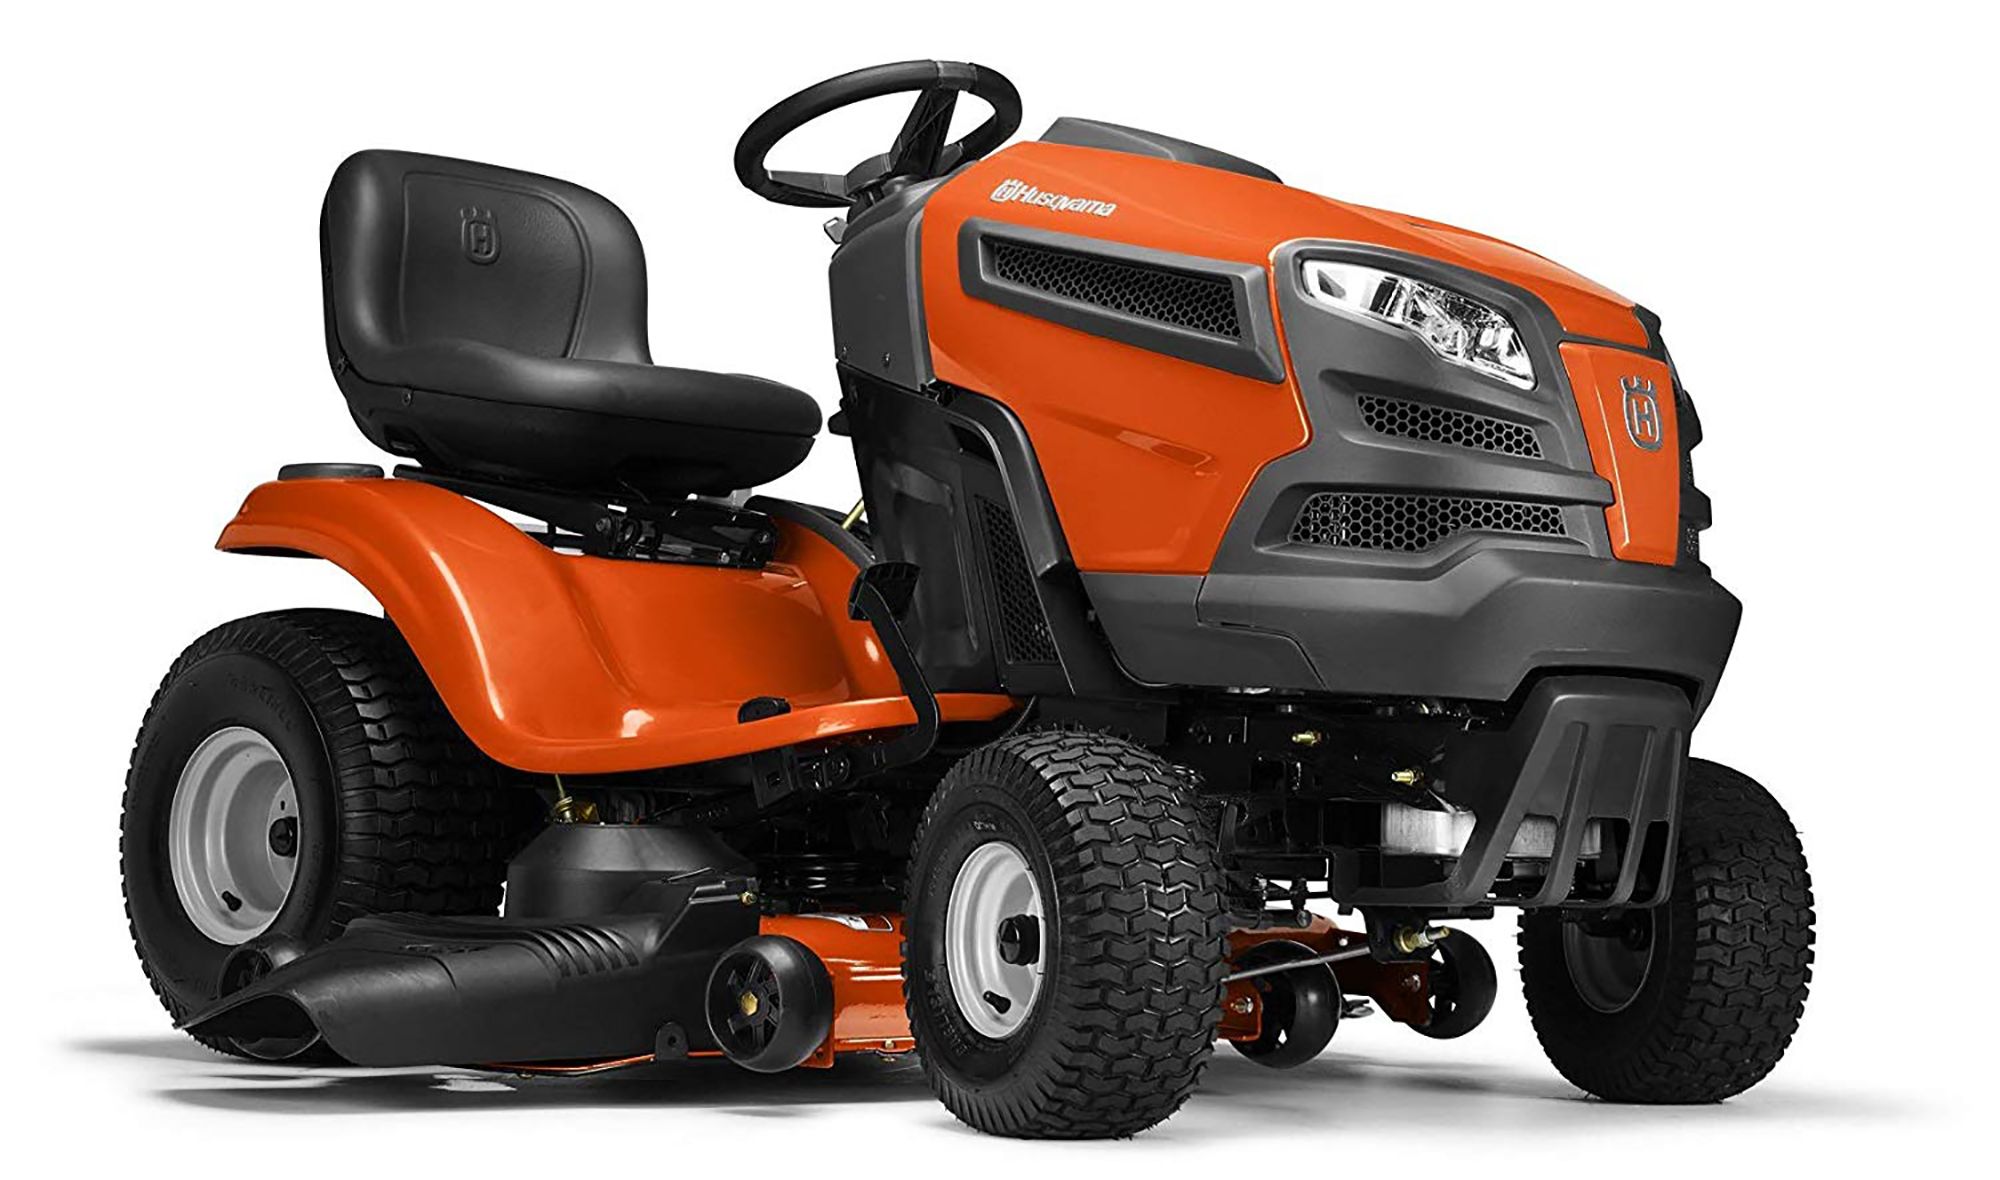 Best Riding Lawn Mower Buyers Guide 2020 ReviewThis